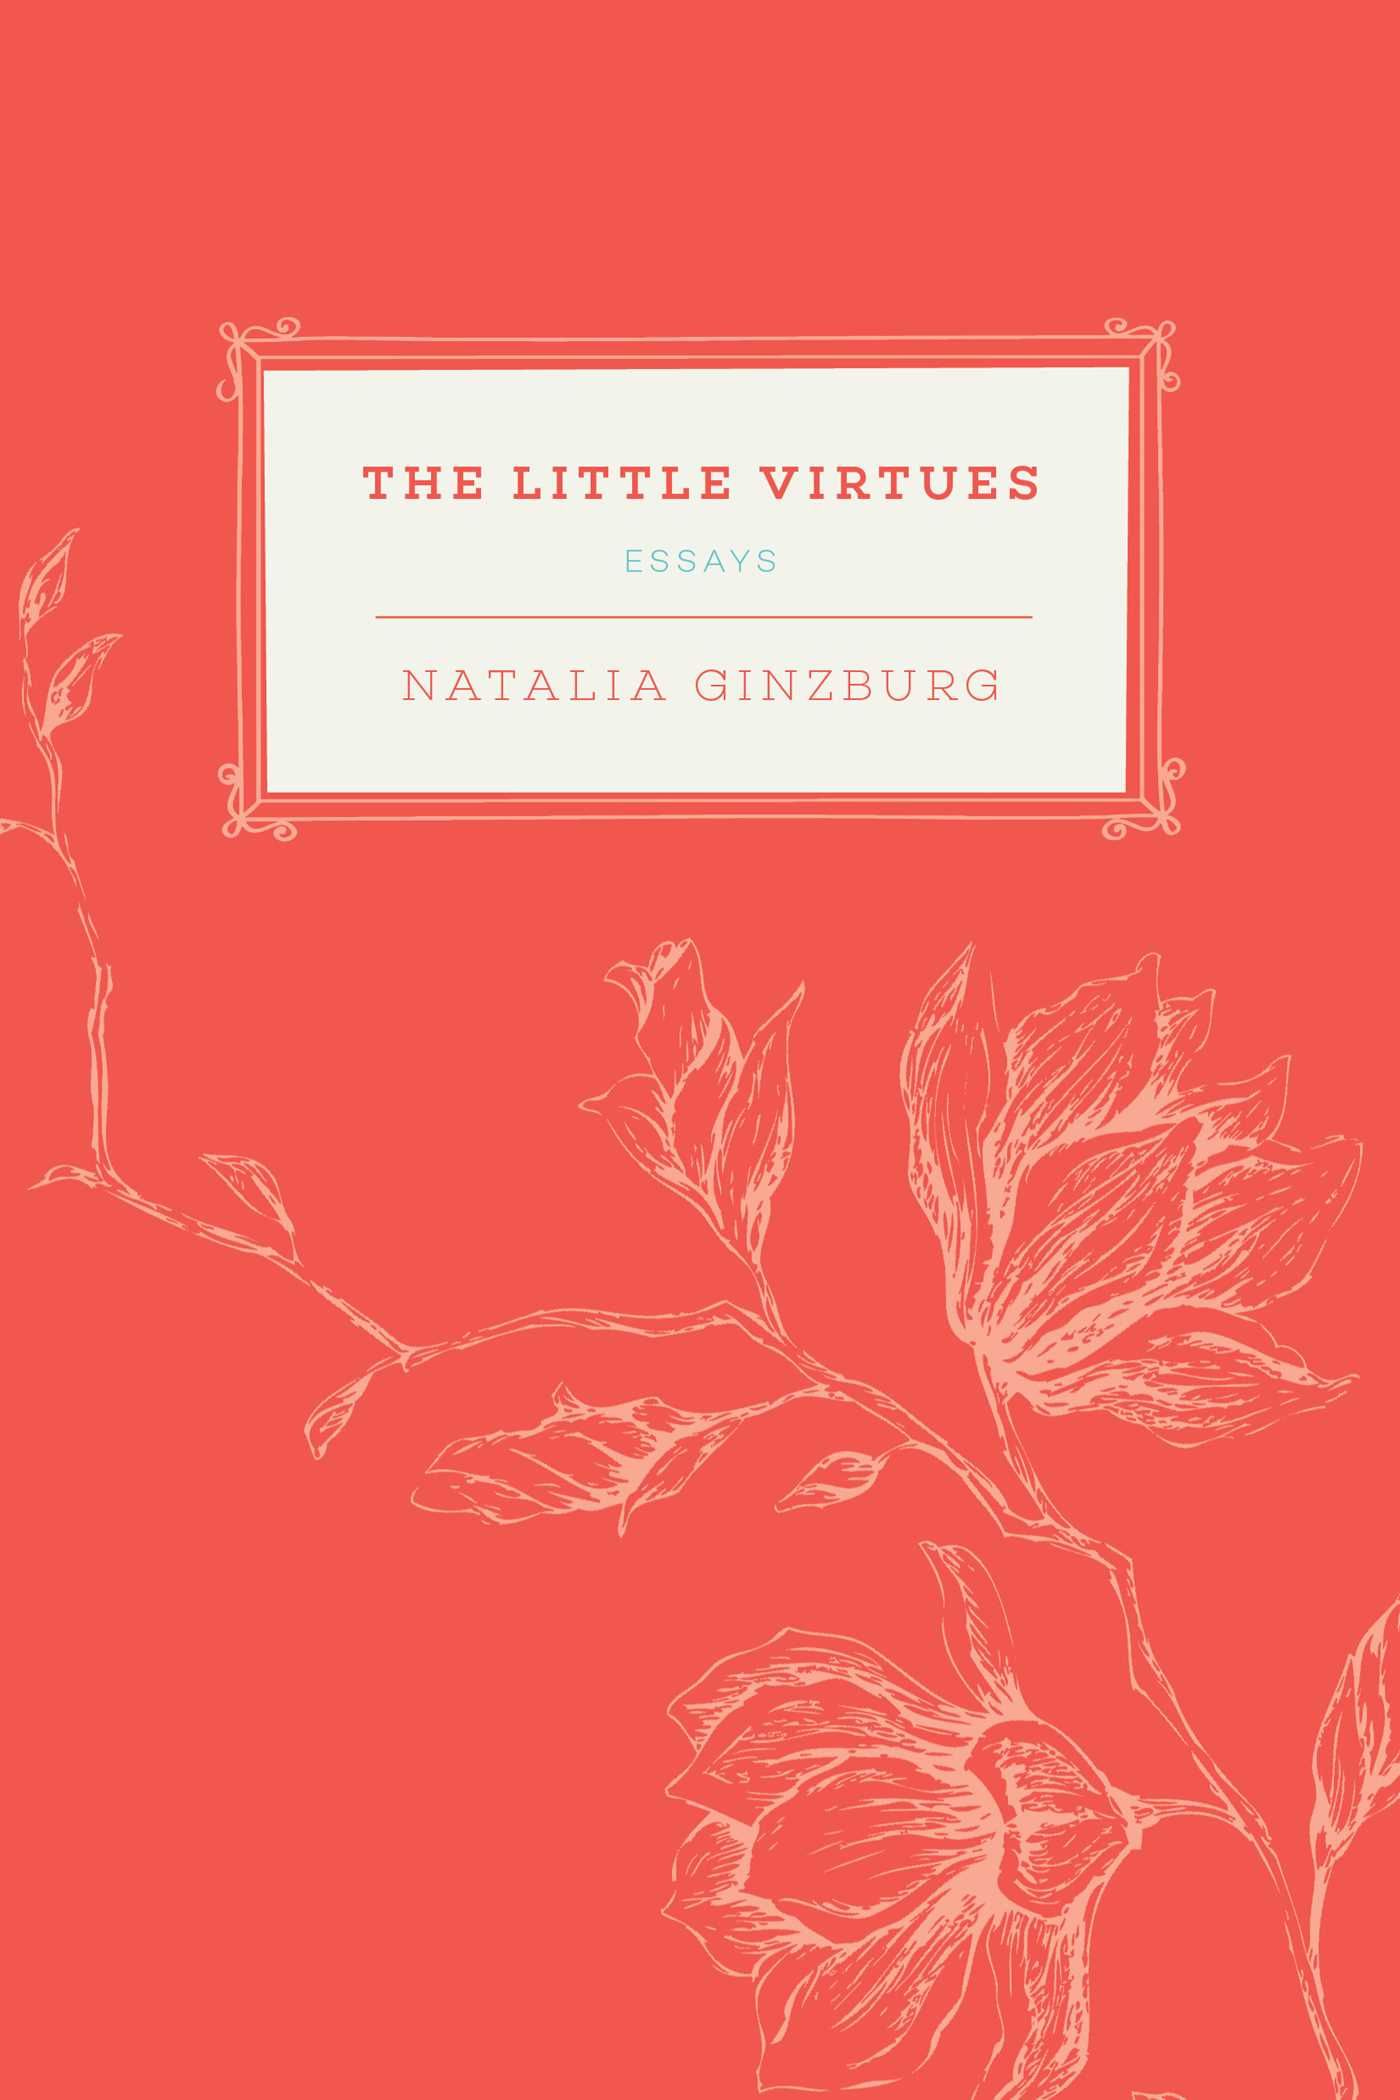 The Little Virtues: Essays by Natalia Ginzburg - Paperback - from More Than  Words Inc. (SKU: BOS-L-14f-00792)